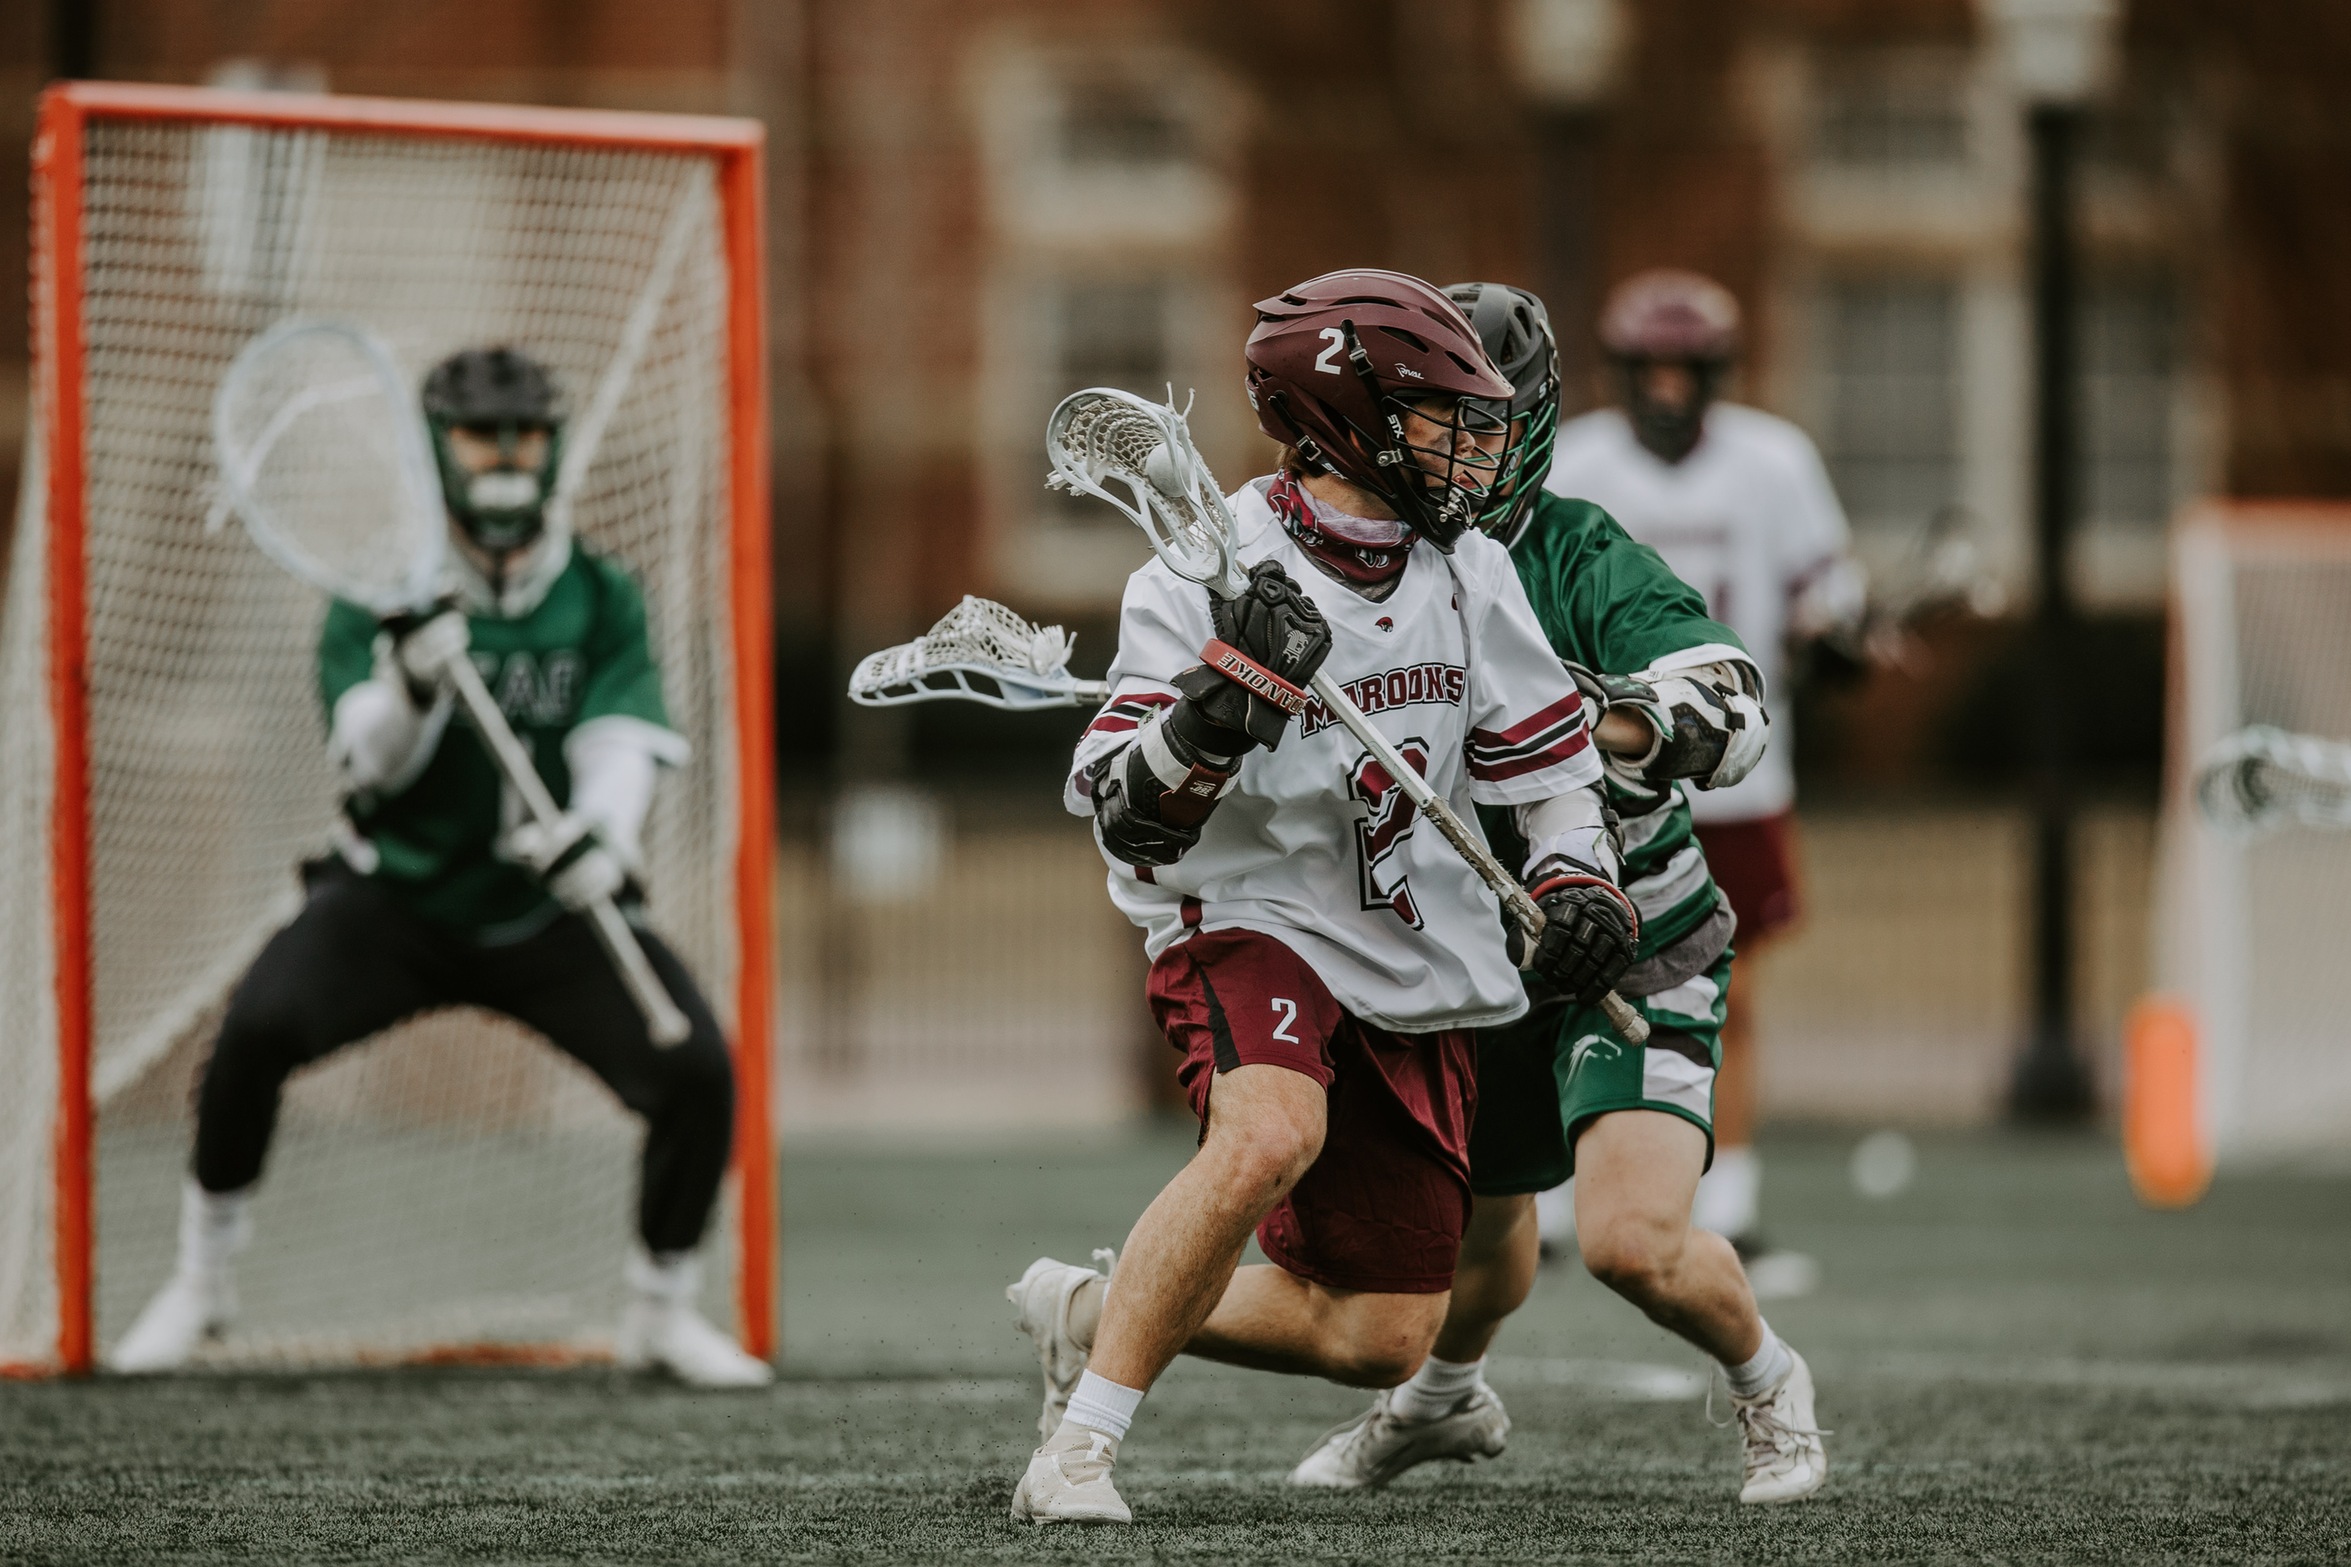 action photo of RC lacrosse player Luca Docking against a defender